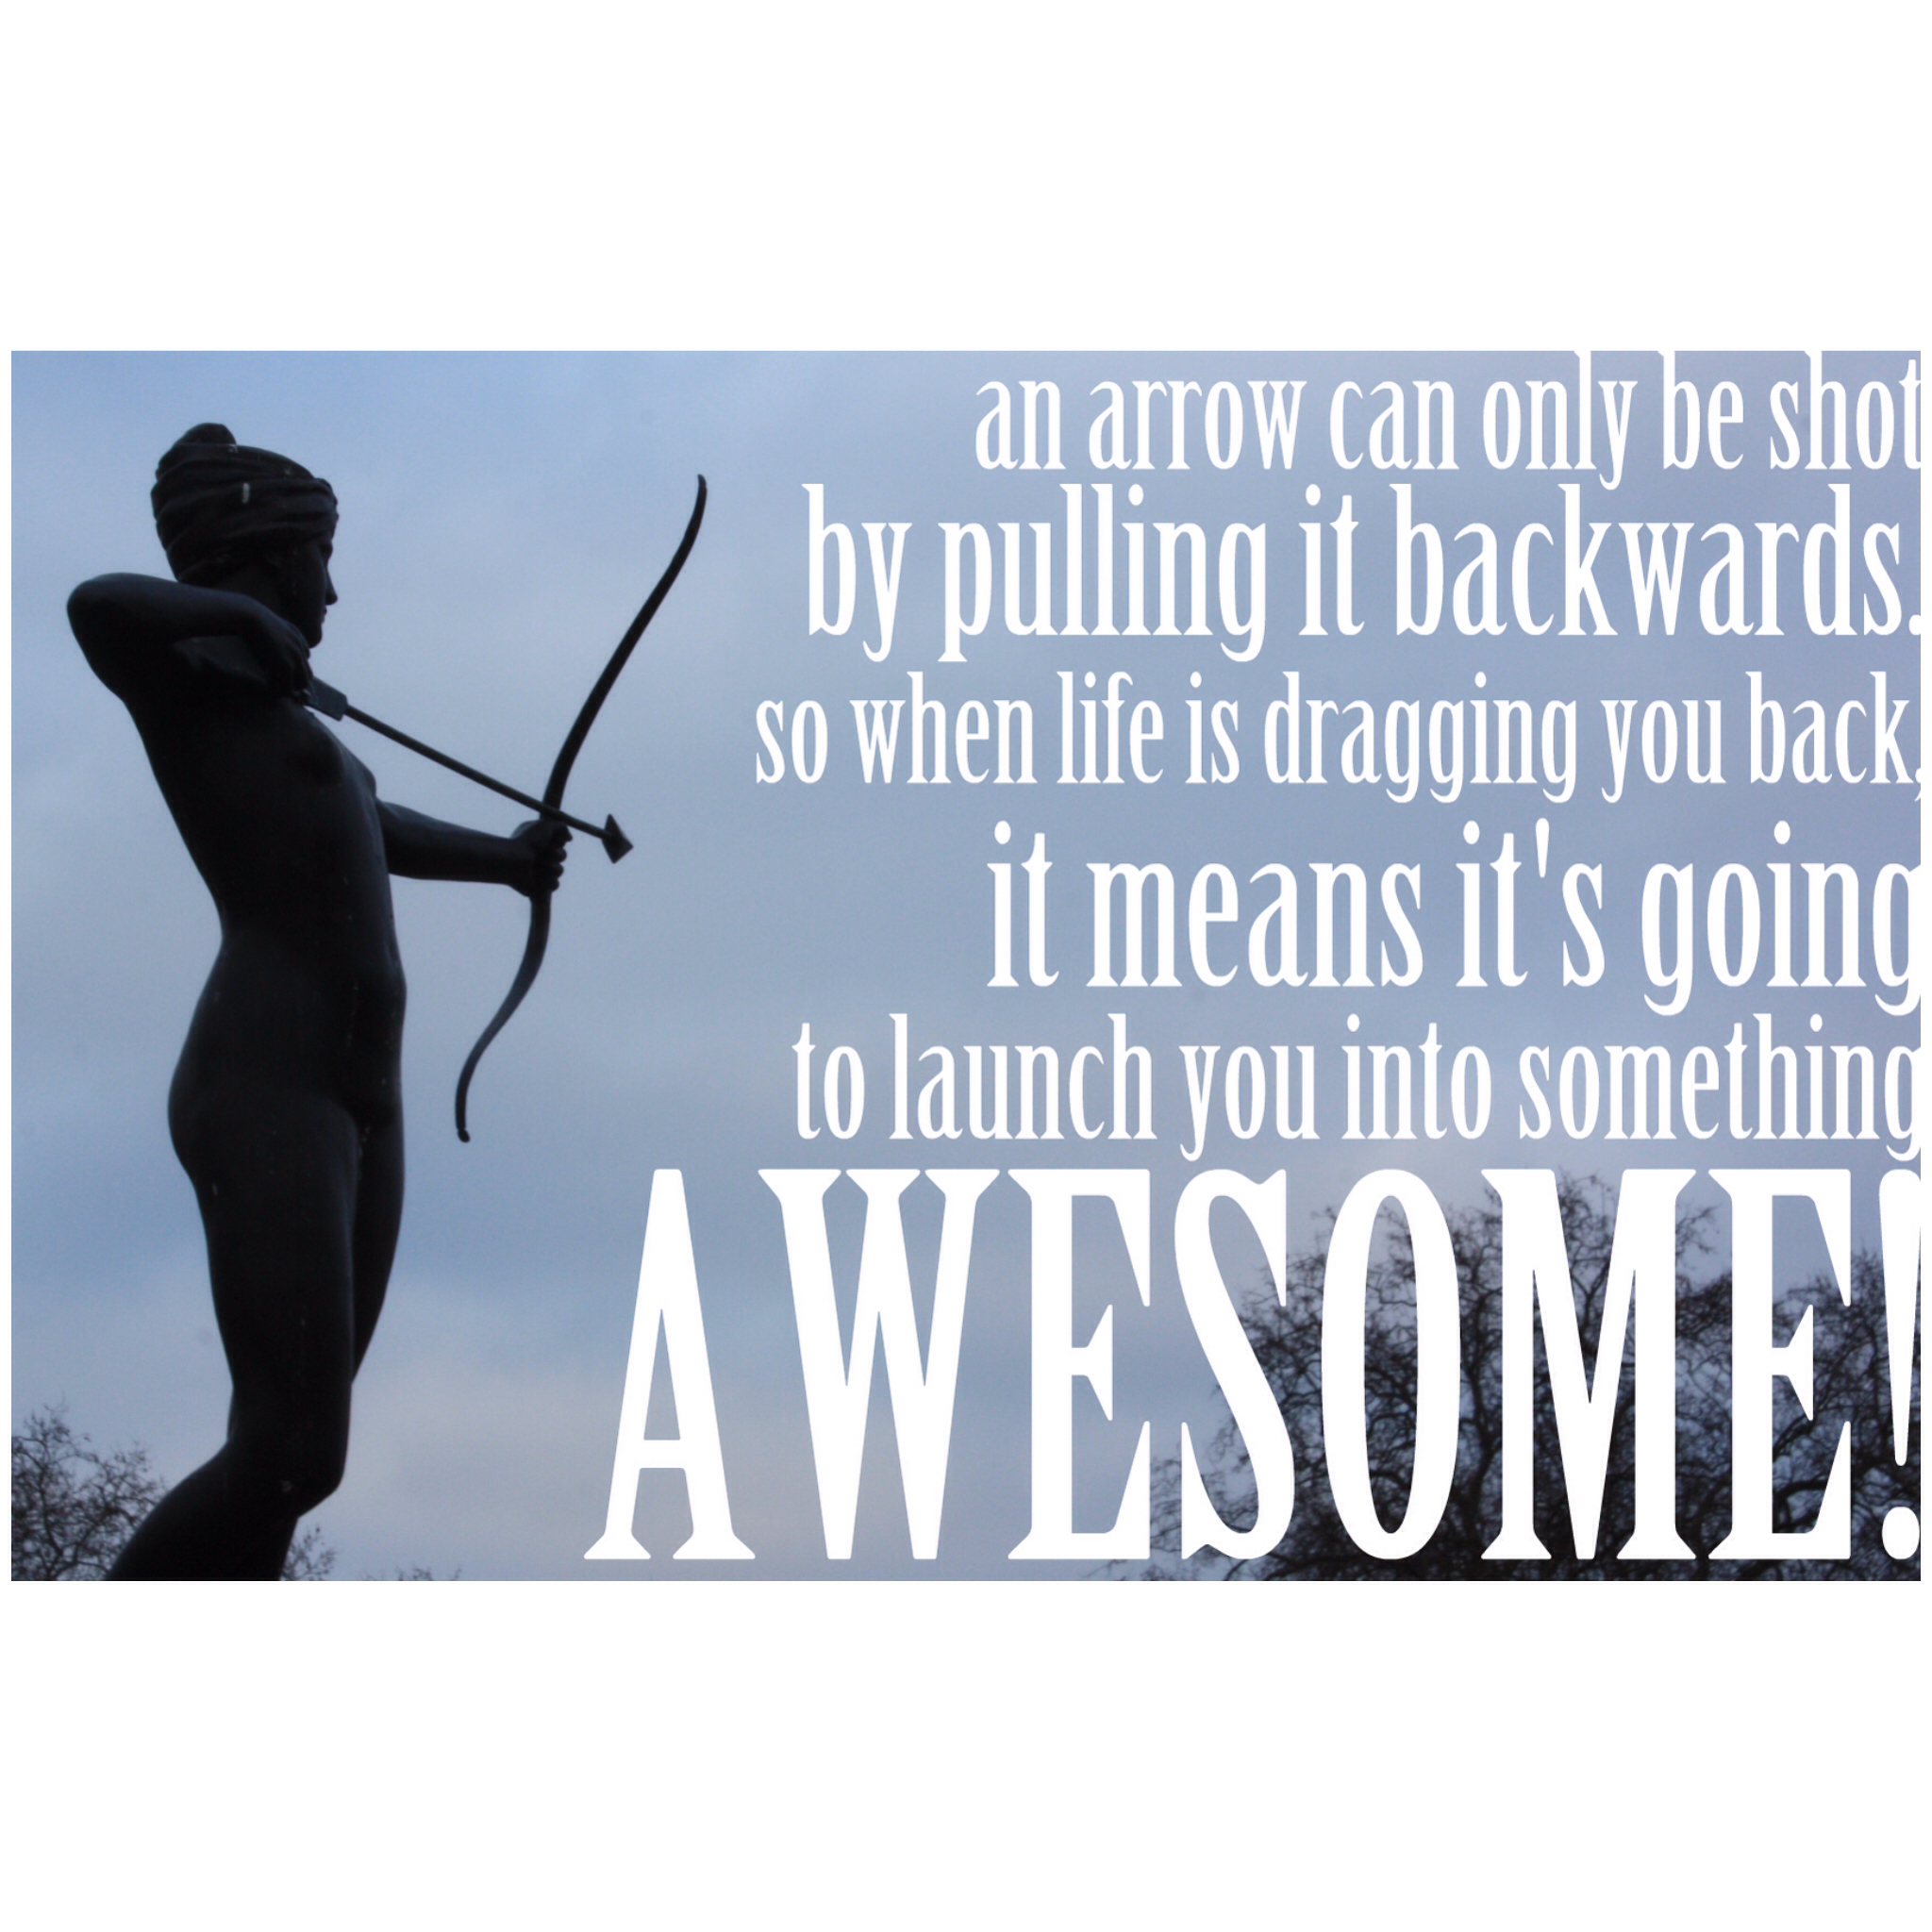 Green Arrow Famous Quotes.